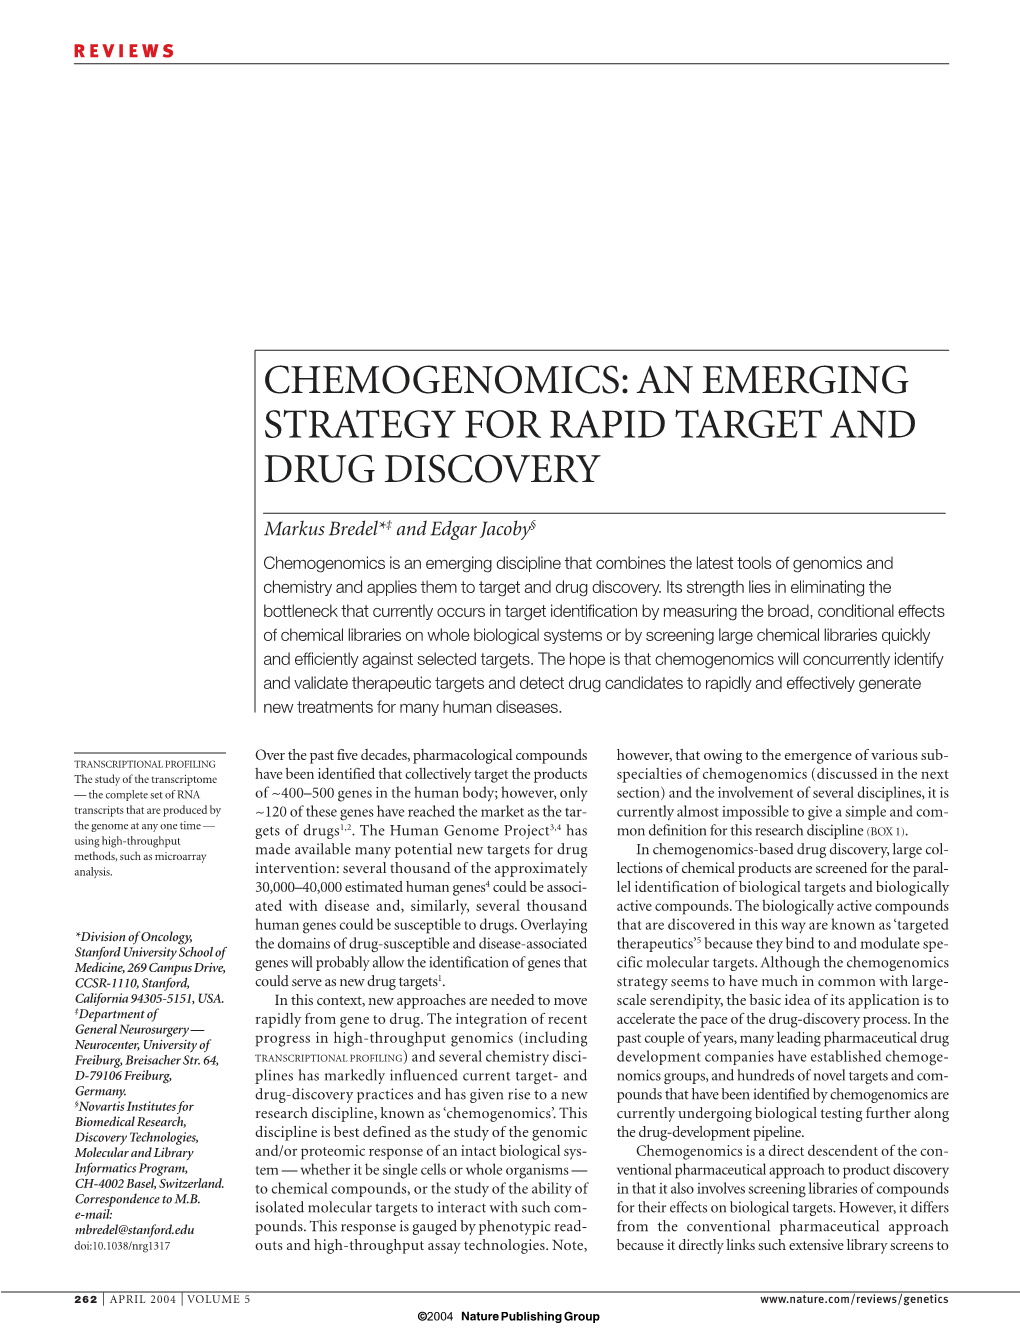 An Emerging Strategy for Rapid Target and Drug Discovery